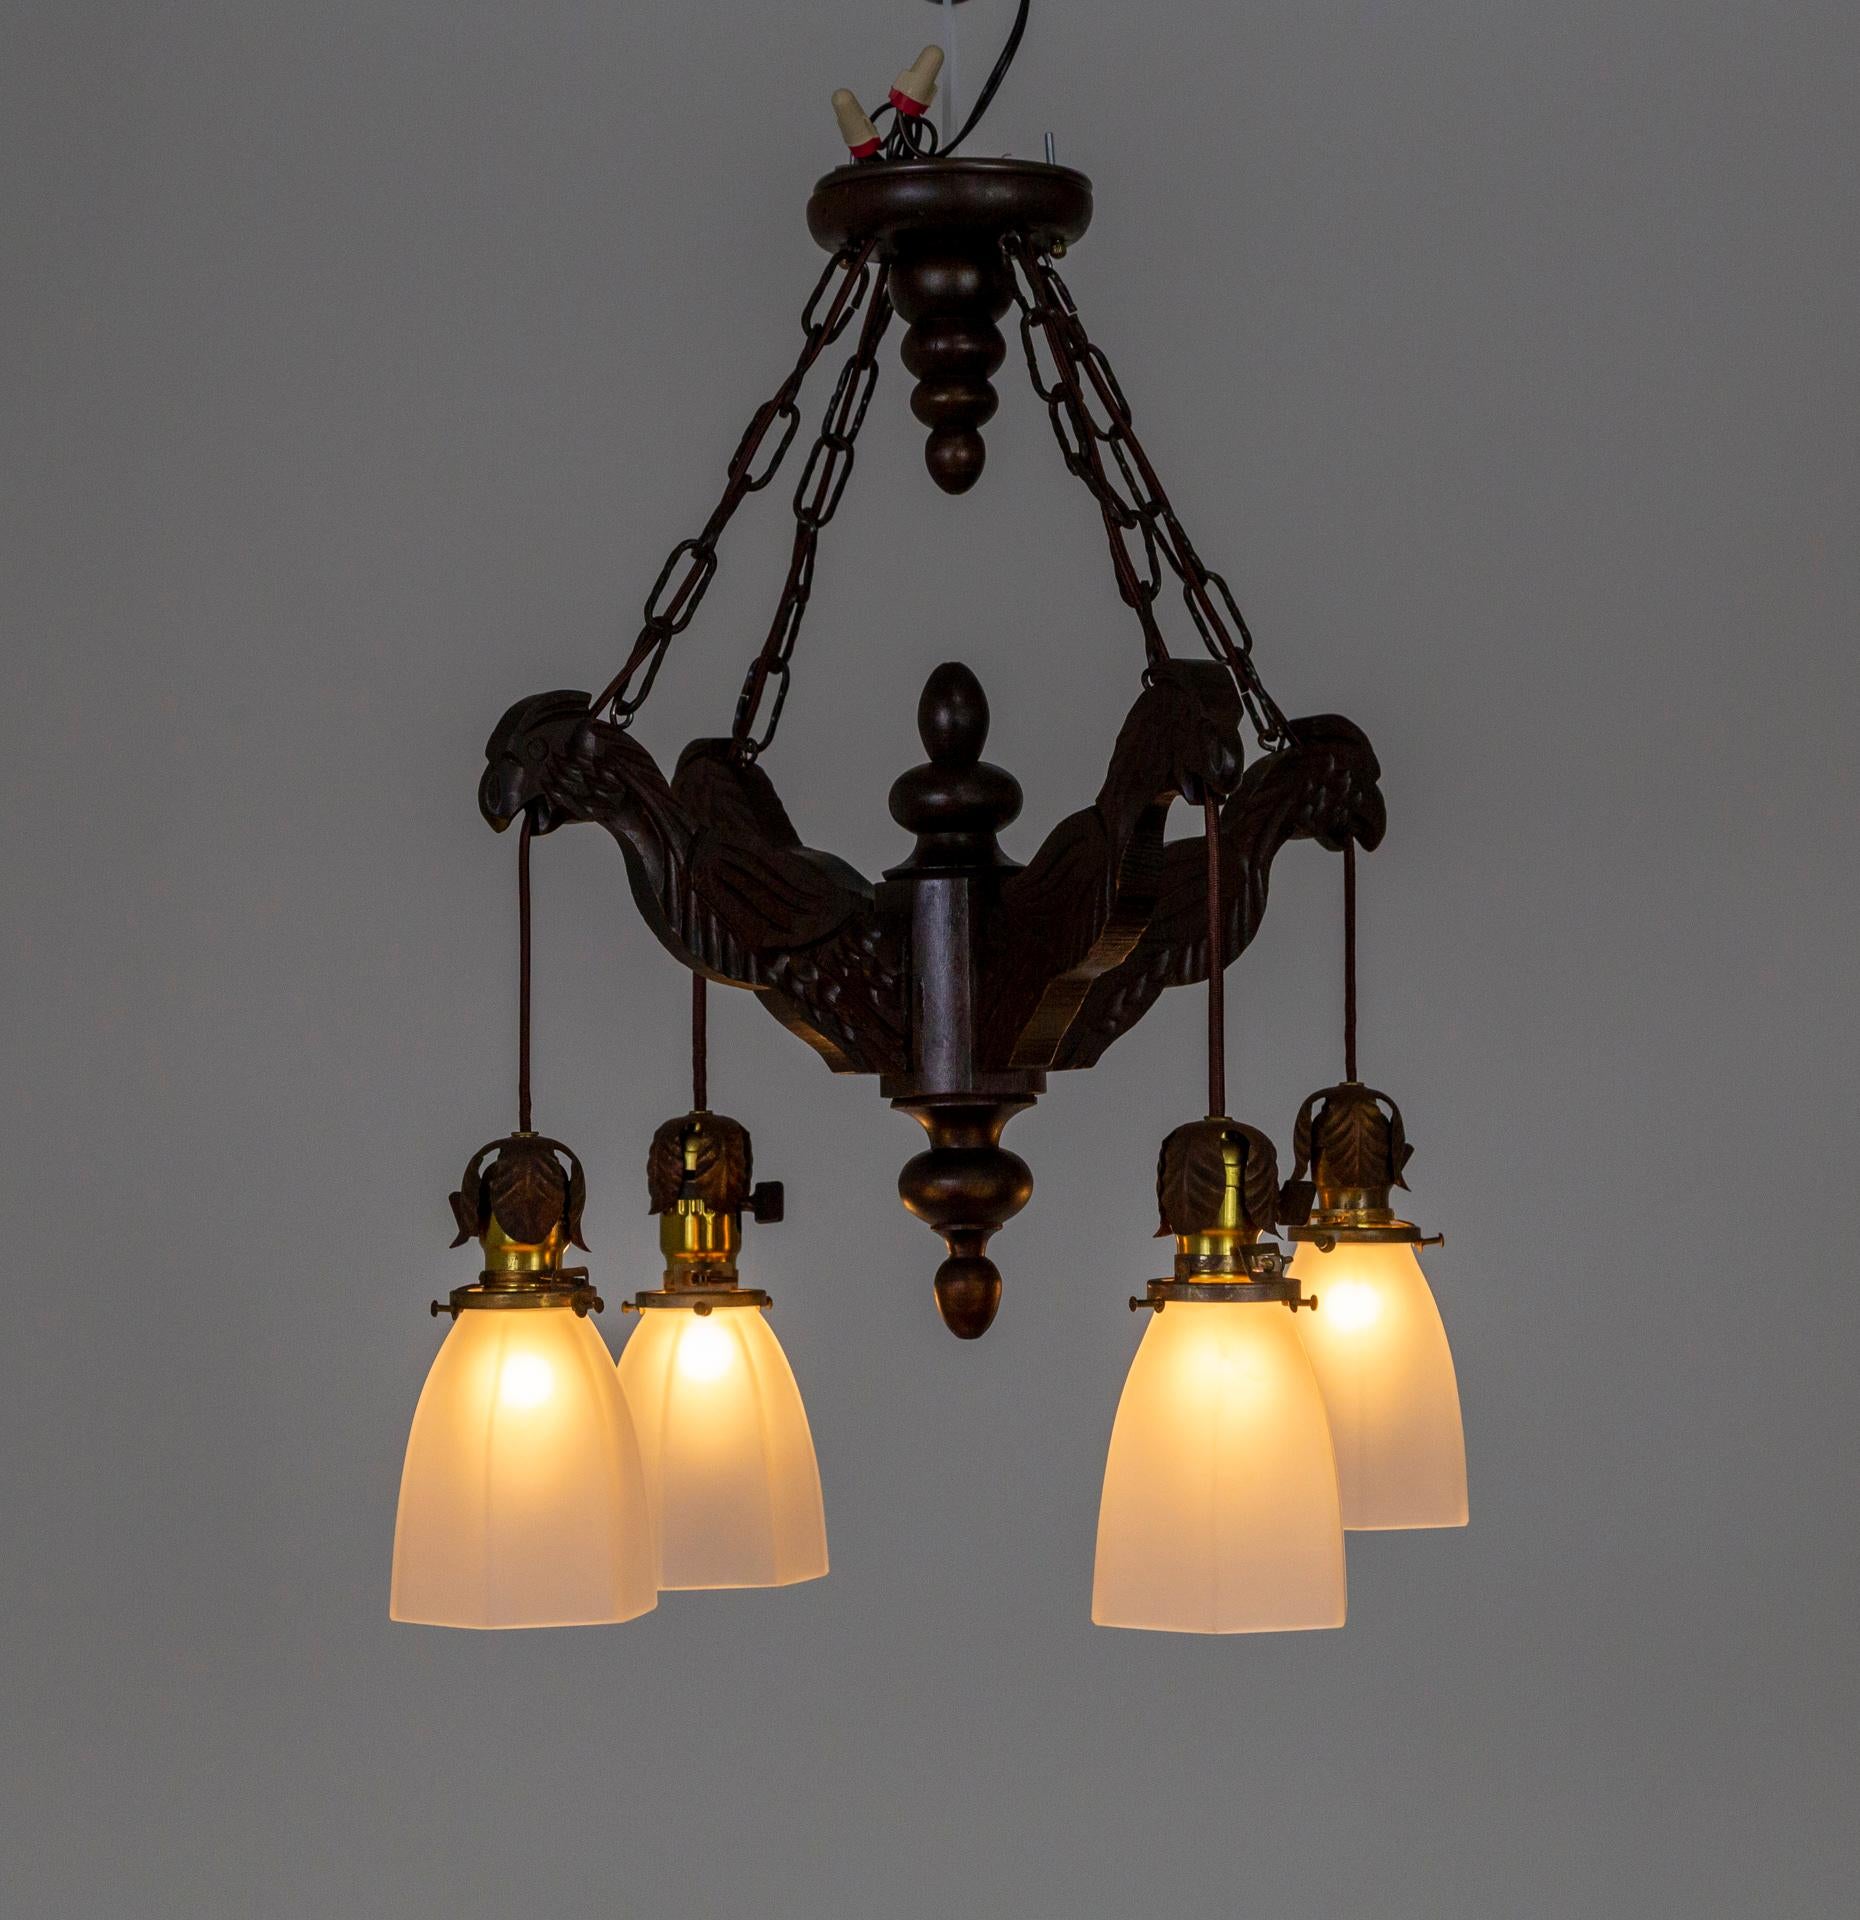 A dark walnut-stained wood chandelier in a 4-arm structure of basic, stylized, hand-carved birds that come together at the center pilaster with top and bottom turned finials. It hangs by four chains with an equally interesting canopy that mimics the